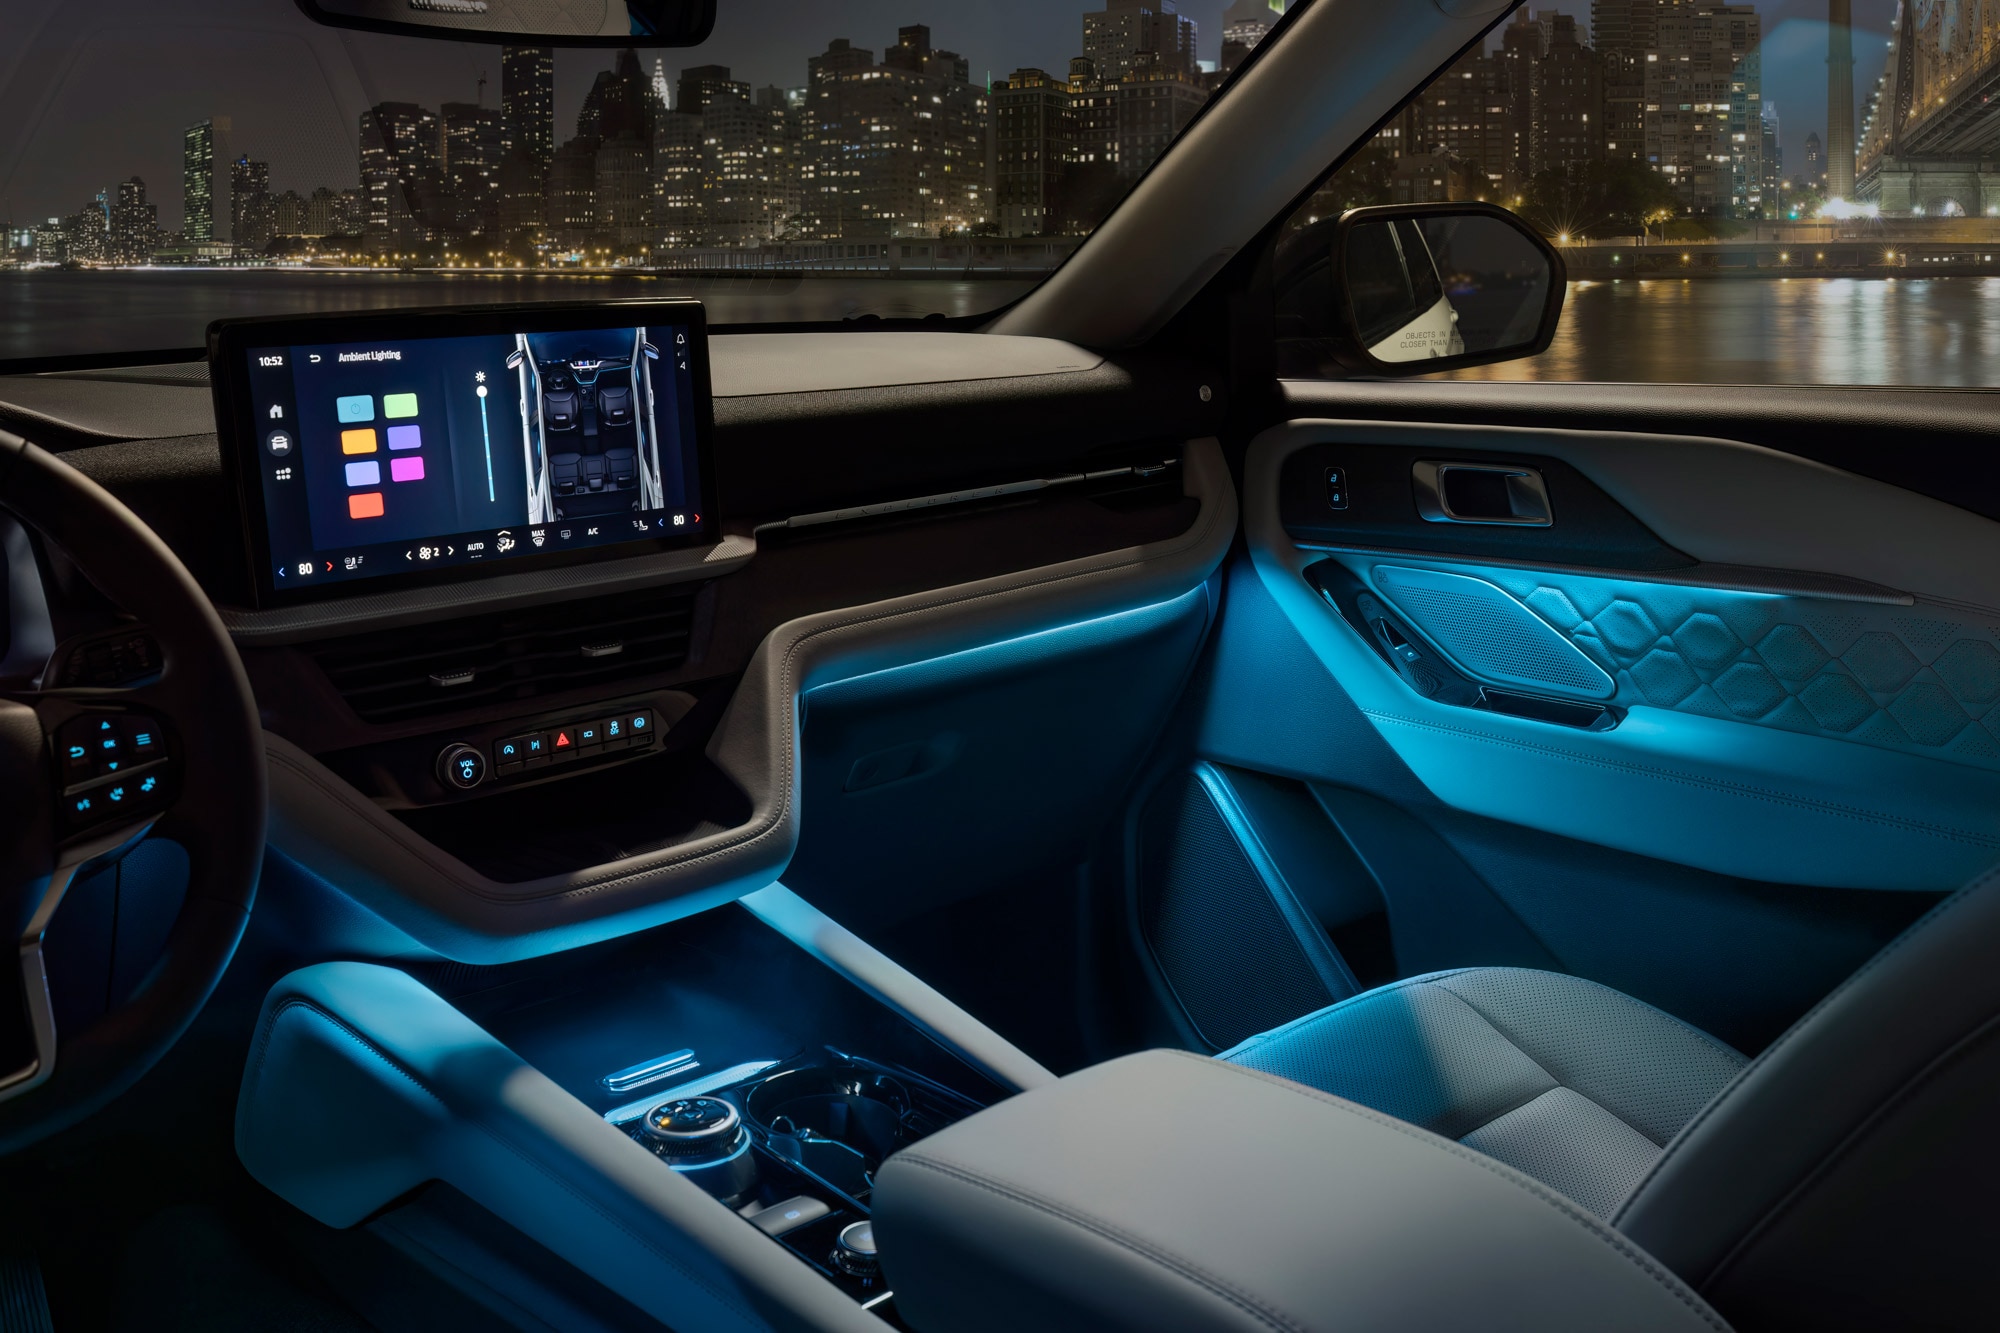 2025 Ford Explorer interior at night with blue ambient lights illuminated.